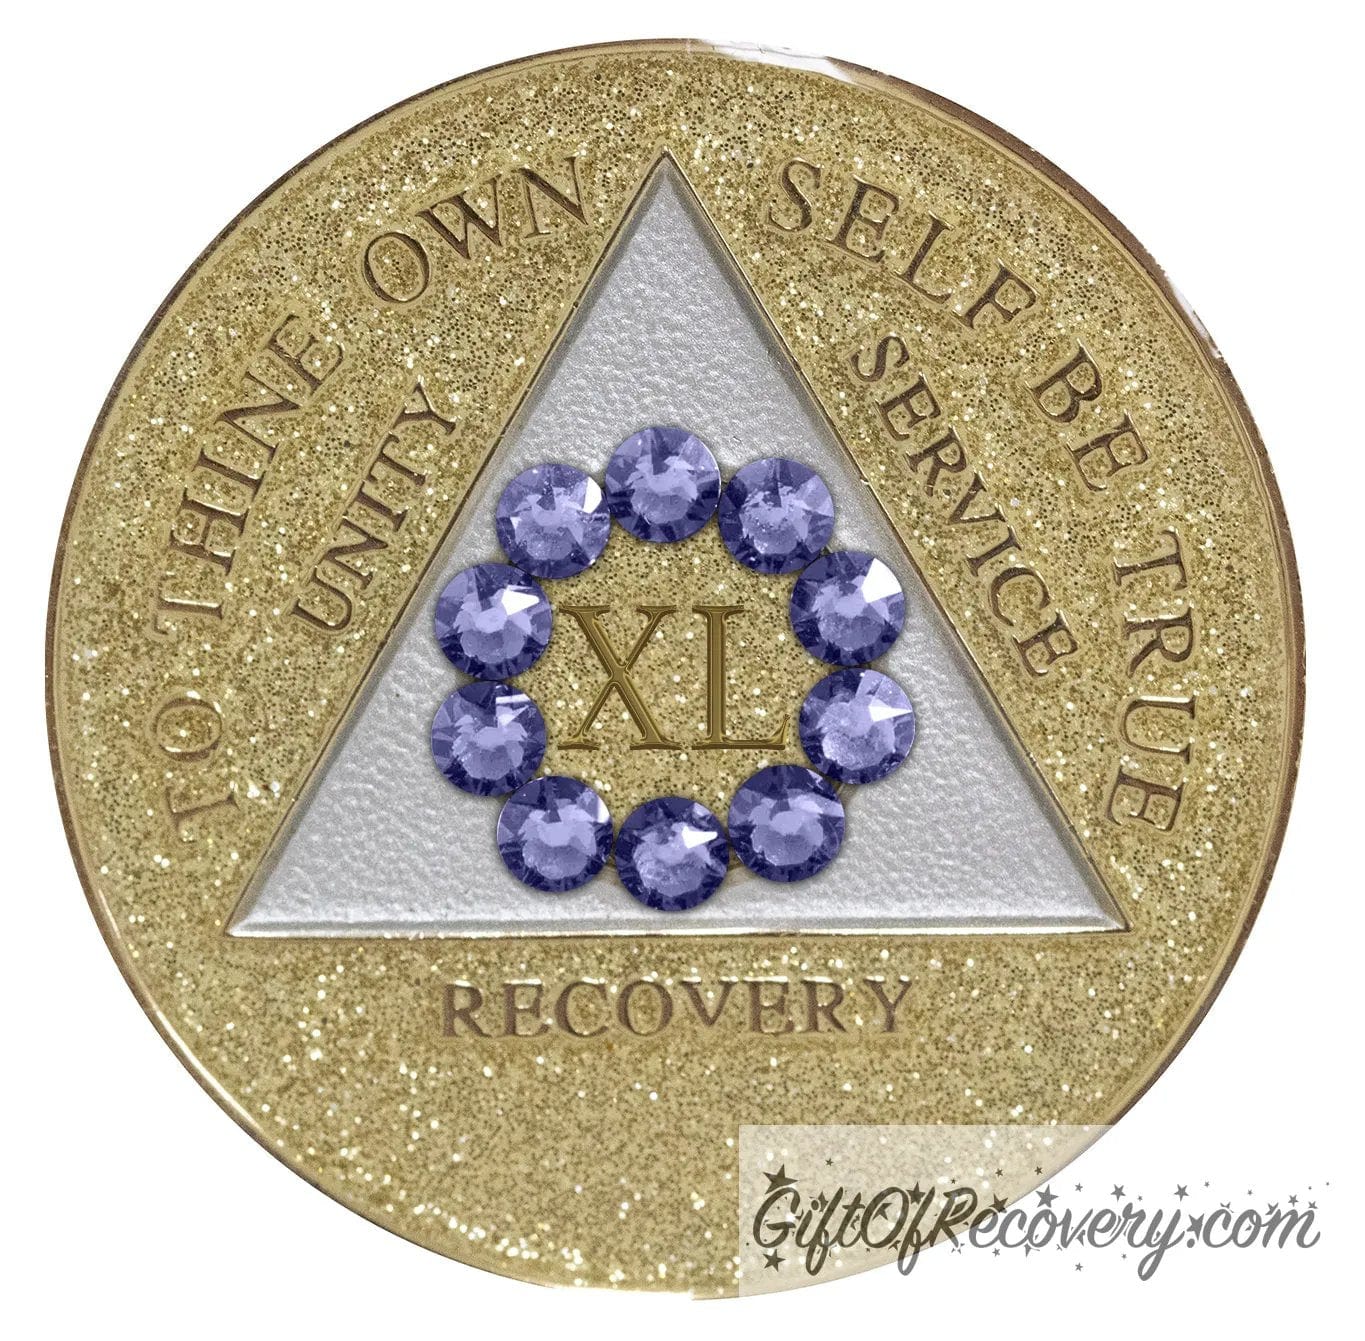 40 year AA medallion gold glitter with ten genuine purple crystal in the shape of a circle around the roman numeral to symbolize our common welfare and personal recovery, and the triangle soft silver, to thine own self be true, unity, service. recovery are embossed with 14k gold-plated brass the recovery medallion is sealed with resin for a scratch free shiny finish.